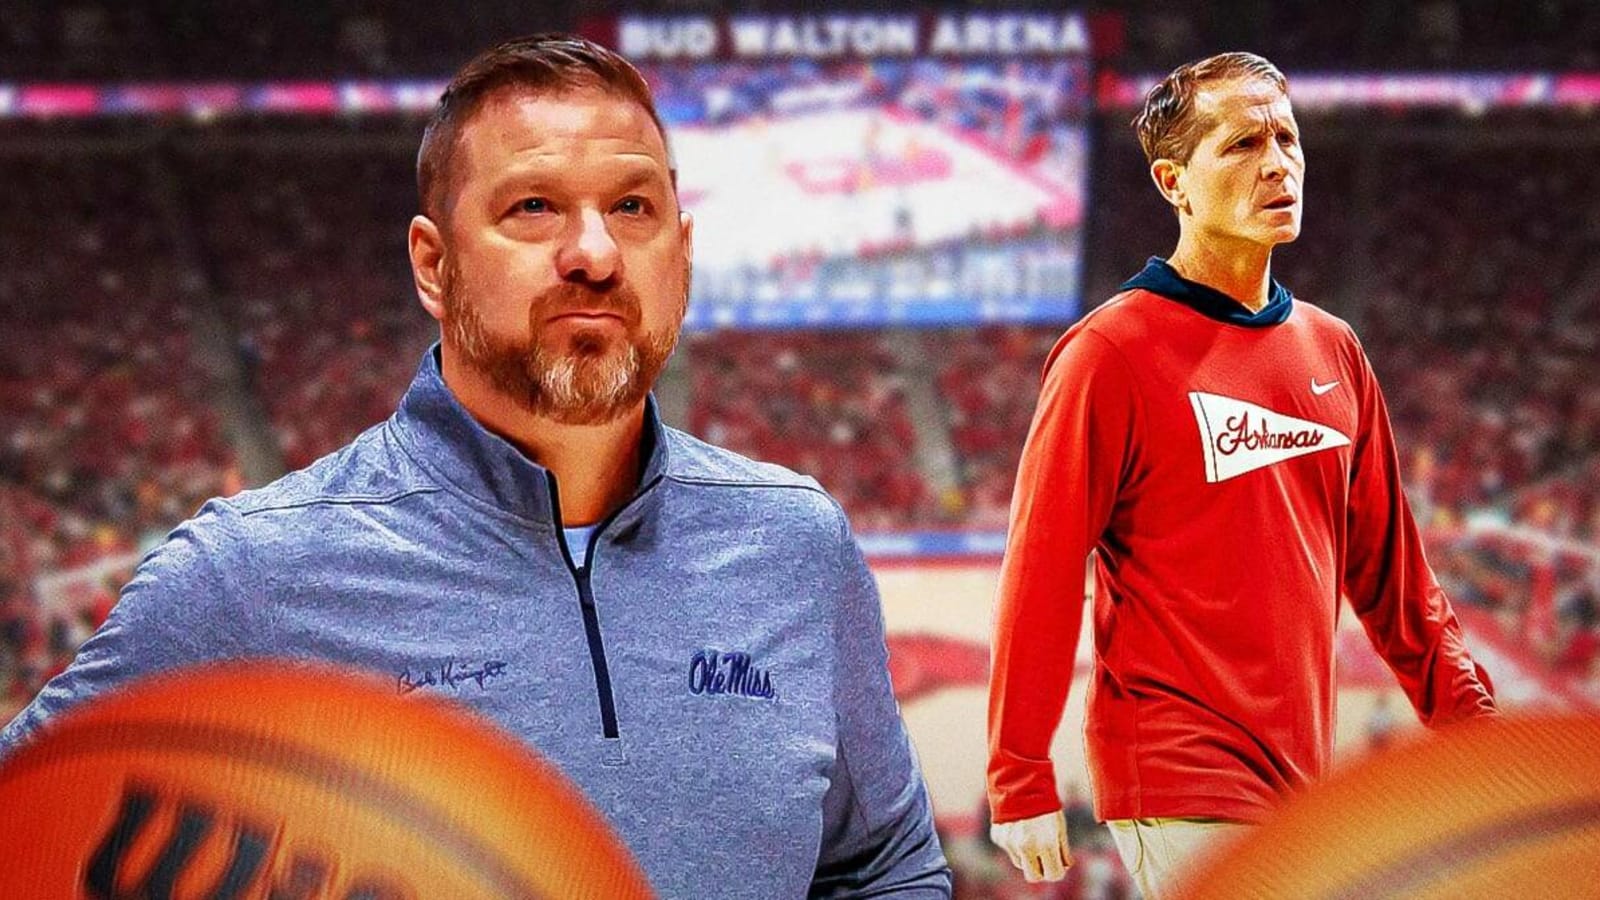 Chris Beard emerges as potential Eric Musselman replacement for Arkansas after controversial Texas tenure